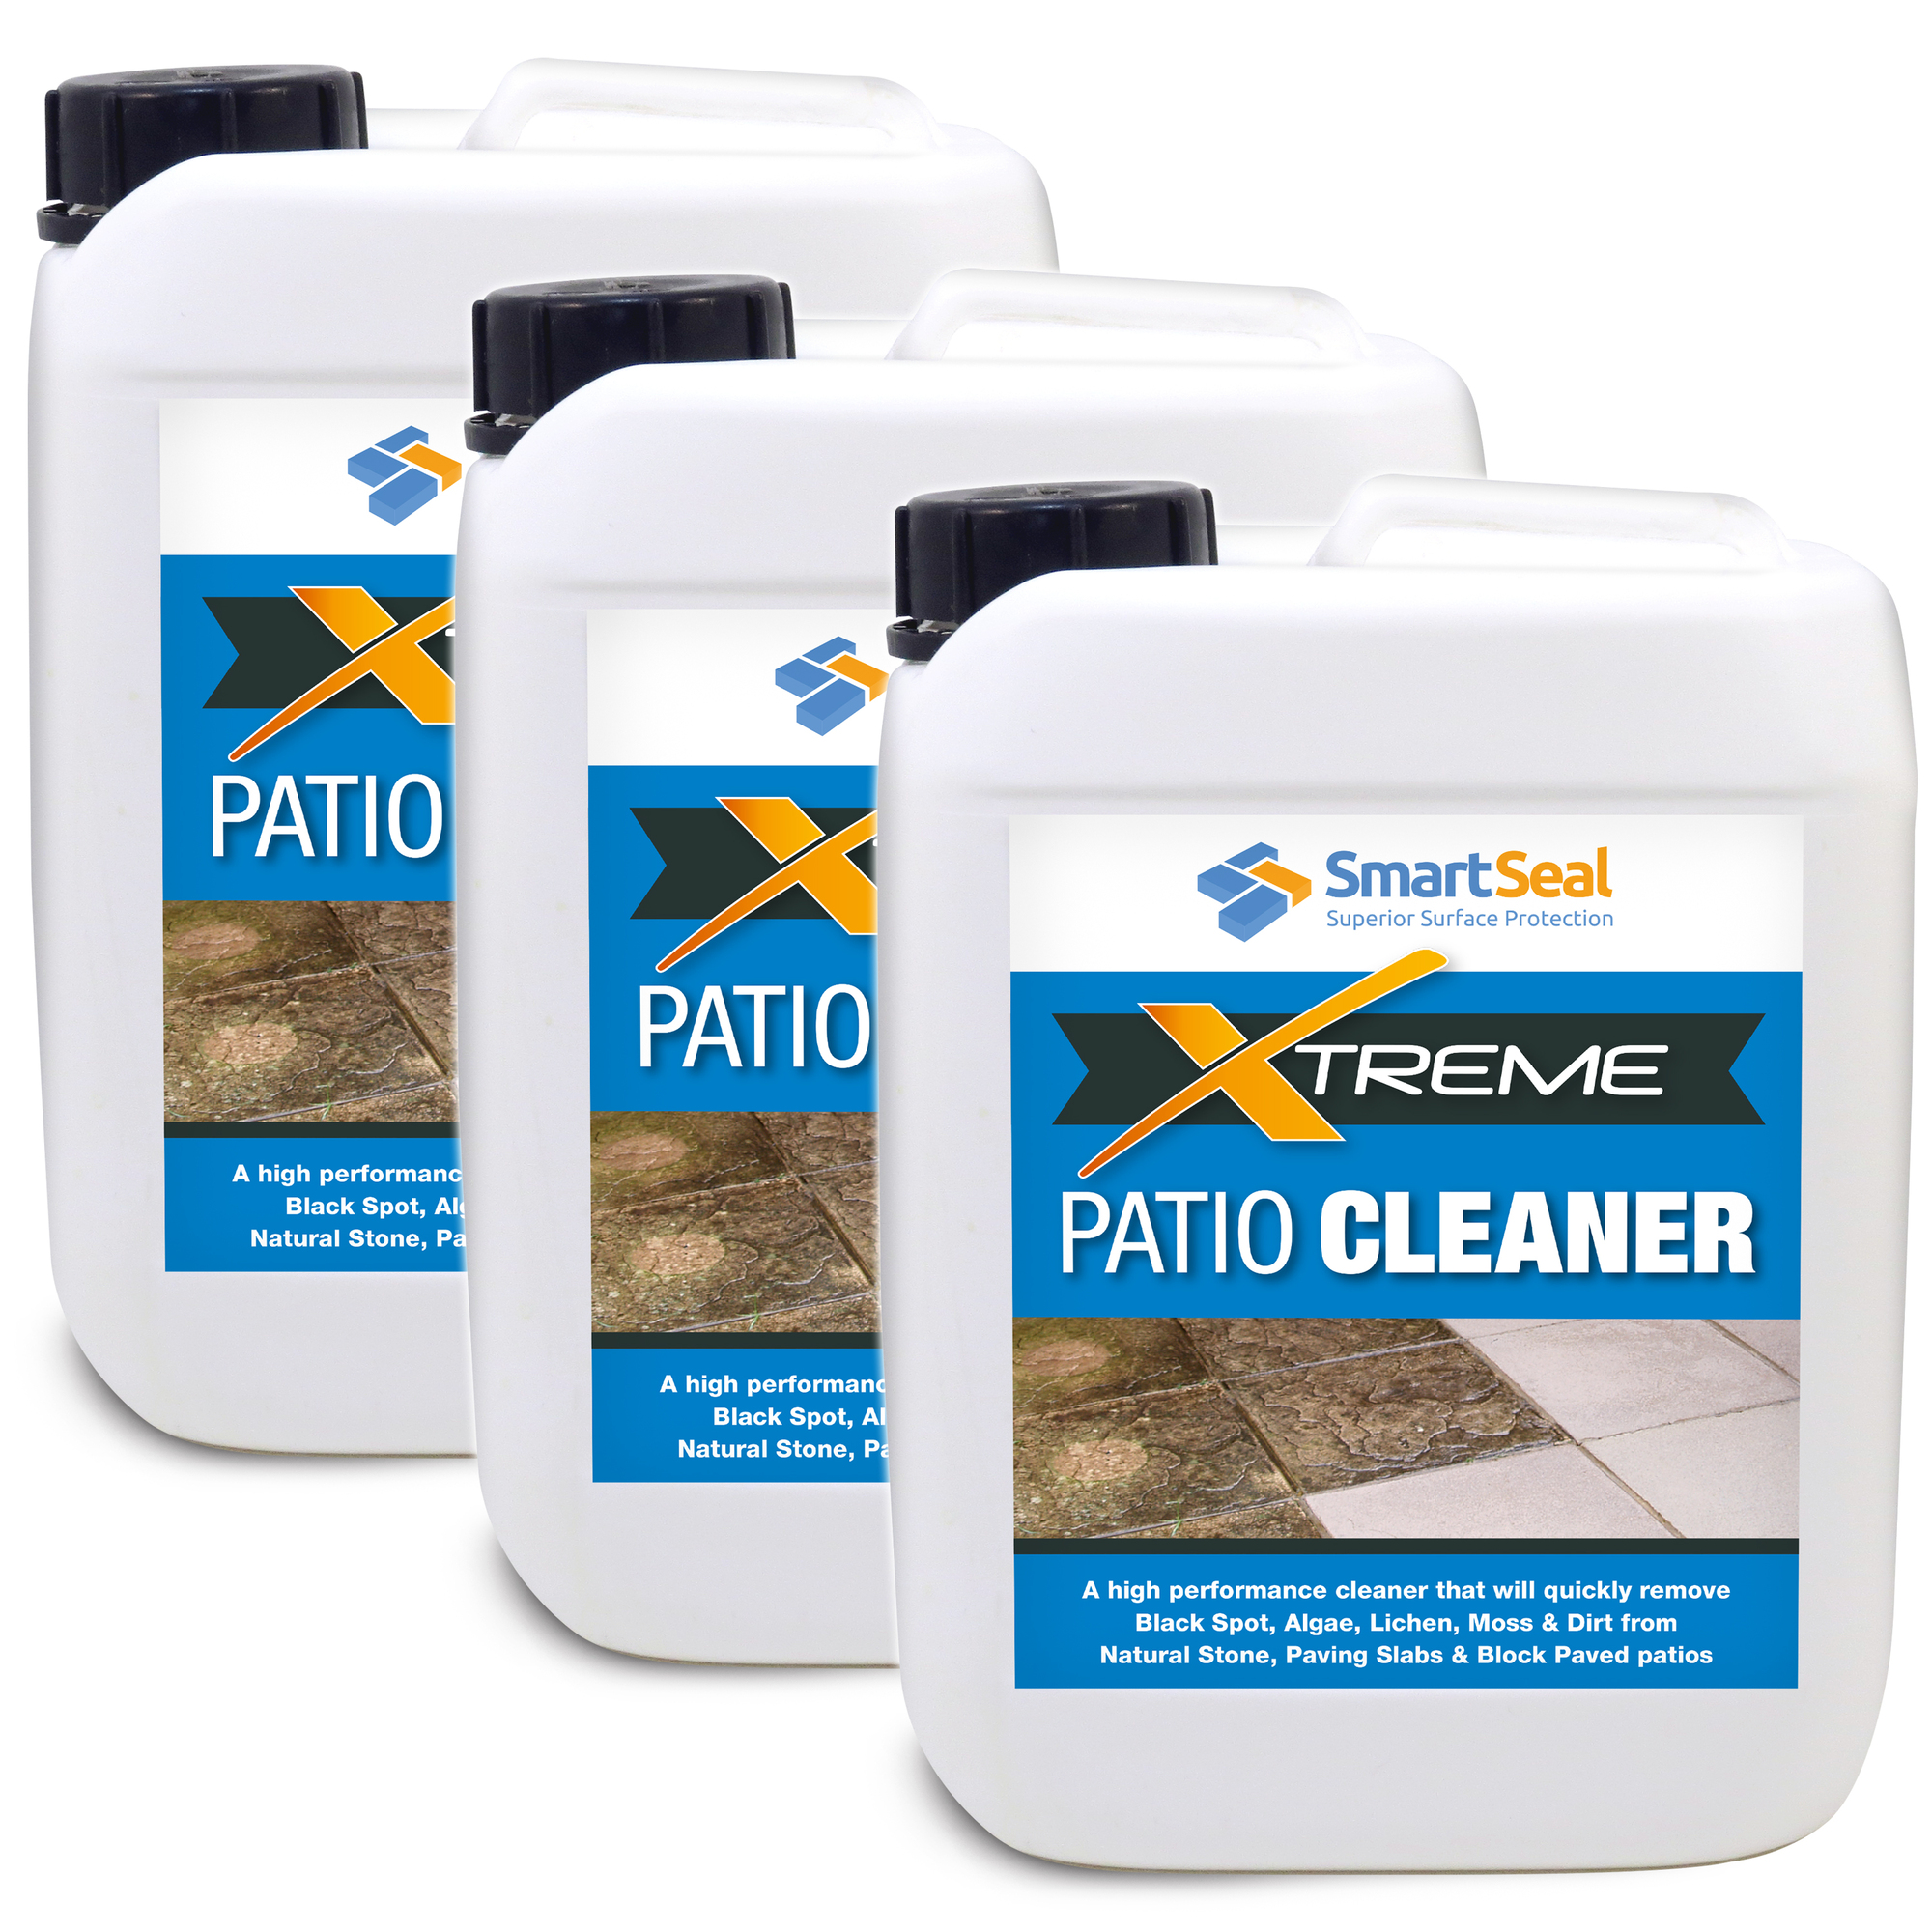 Black Spot Remover Best Patio Cleaner, What Is The Best Patio Cleaner